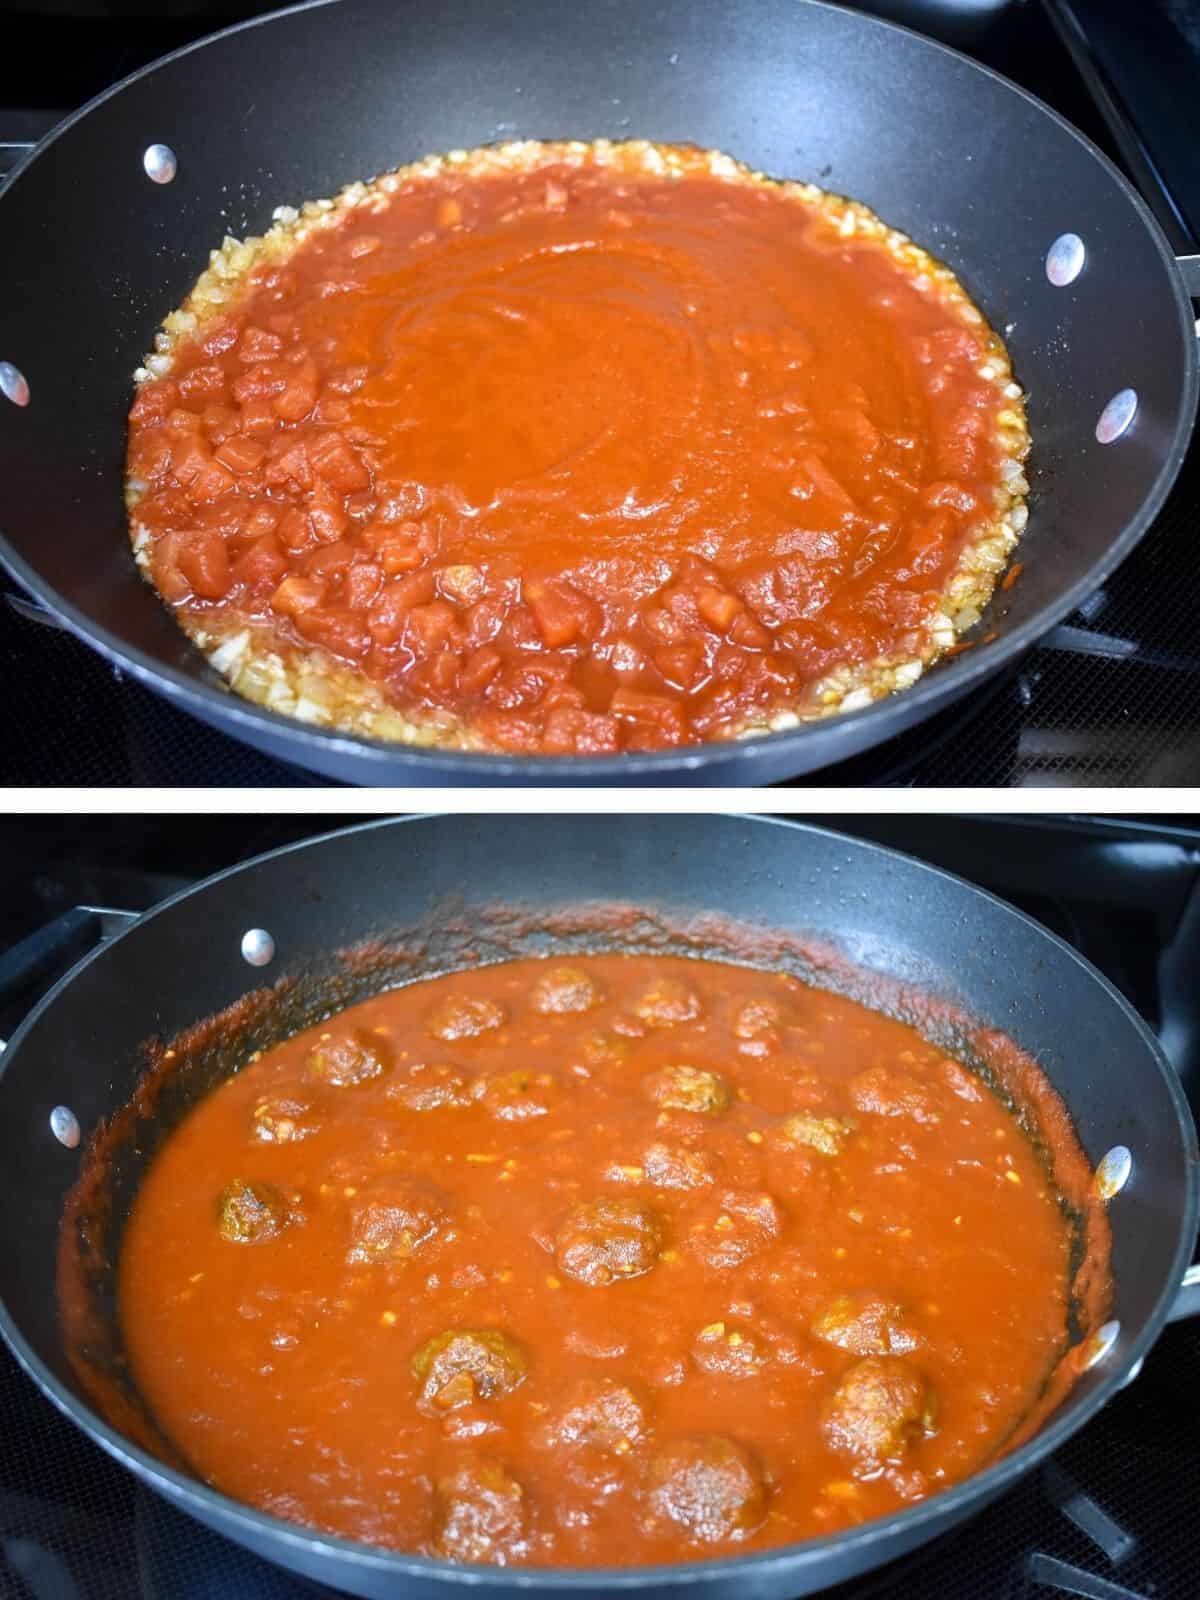 Two images showing how to make the meatball sauce, in a large, deep skillet.